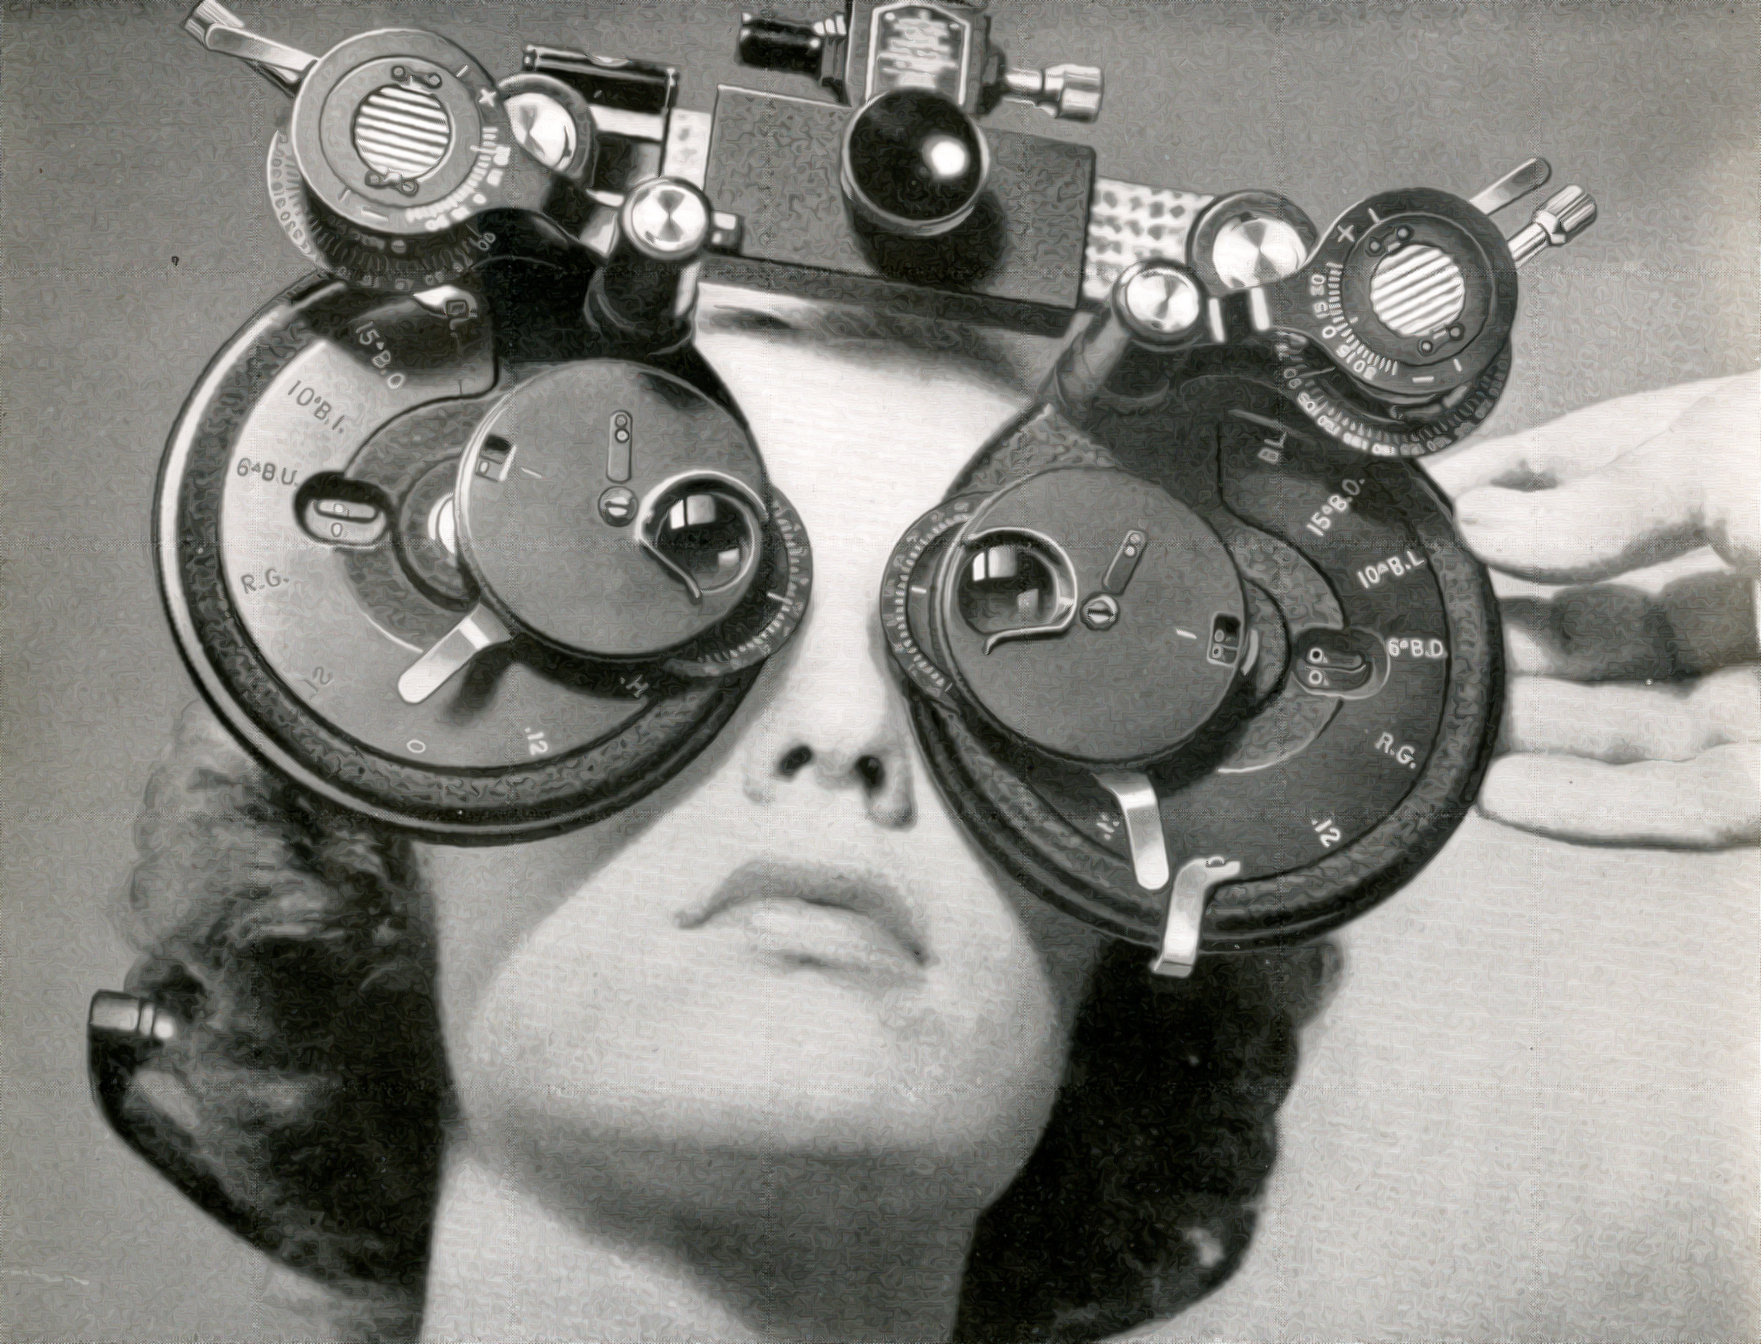 Woman with phoropter in 1945. Courtesy of American Academy of Ophthalmology Museum of Vision.